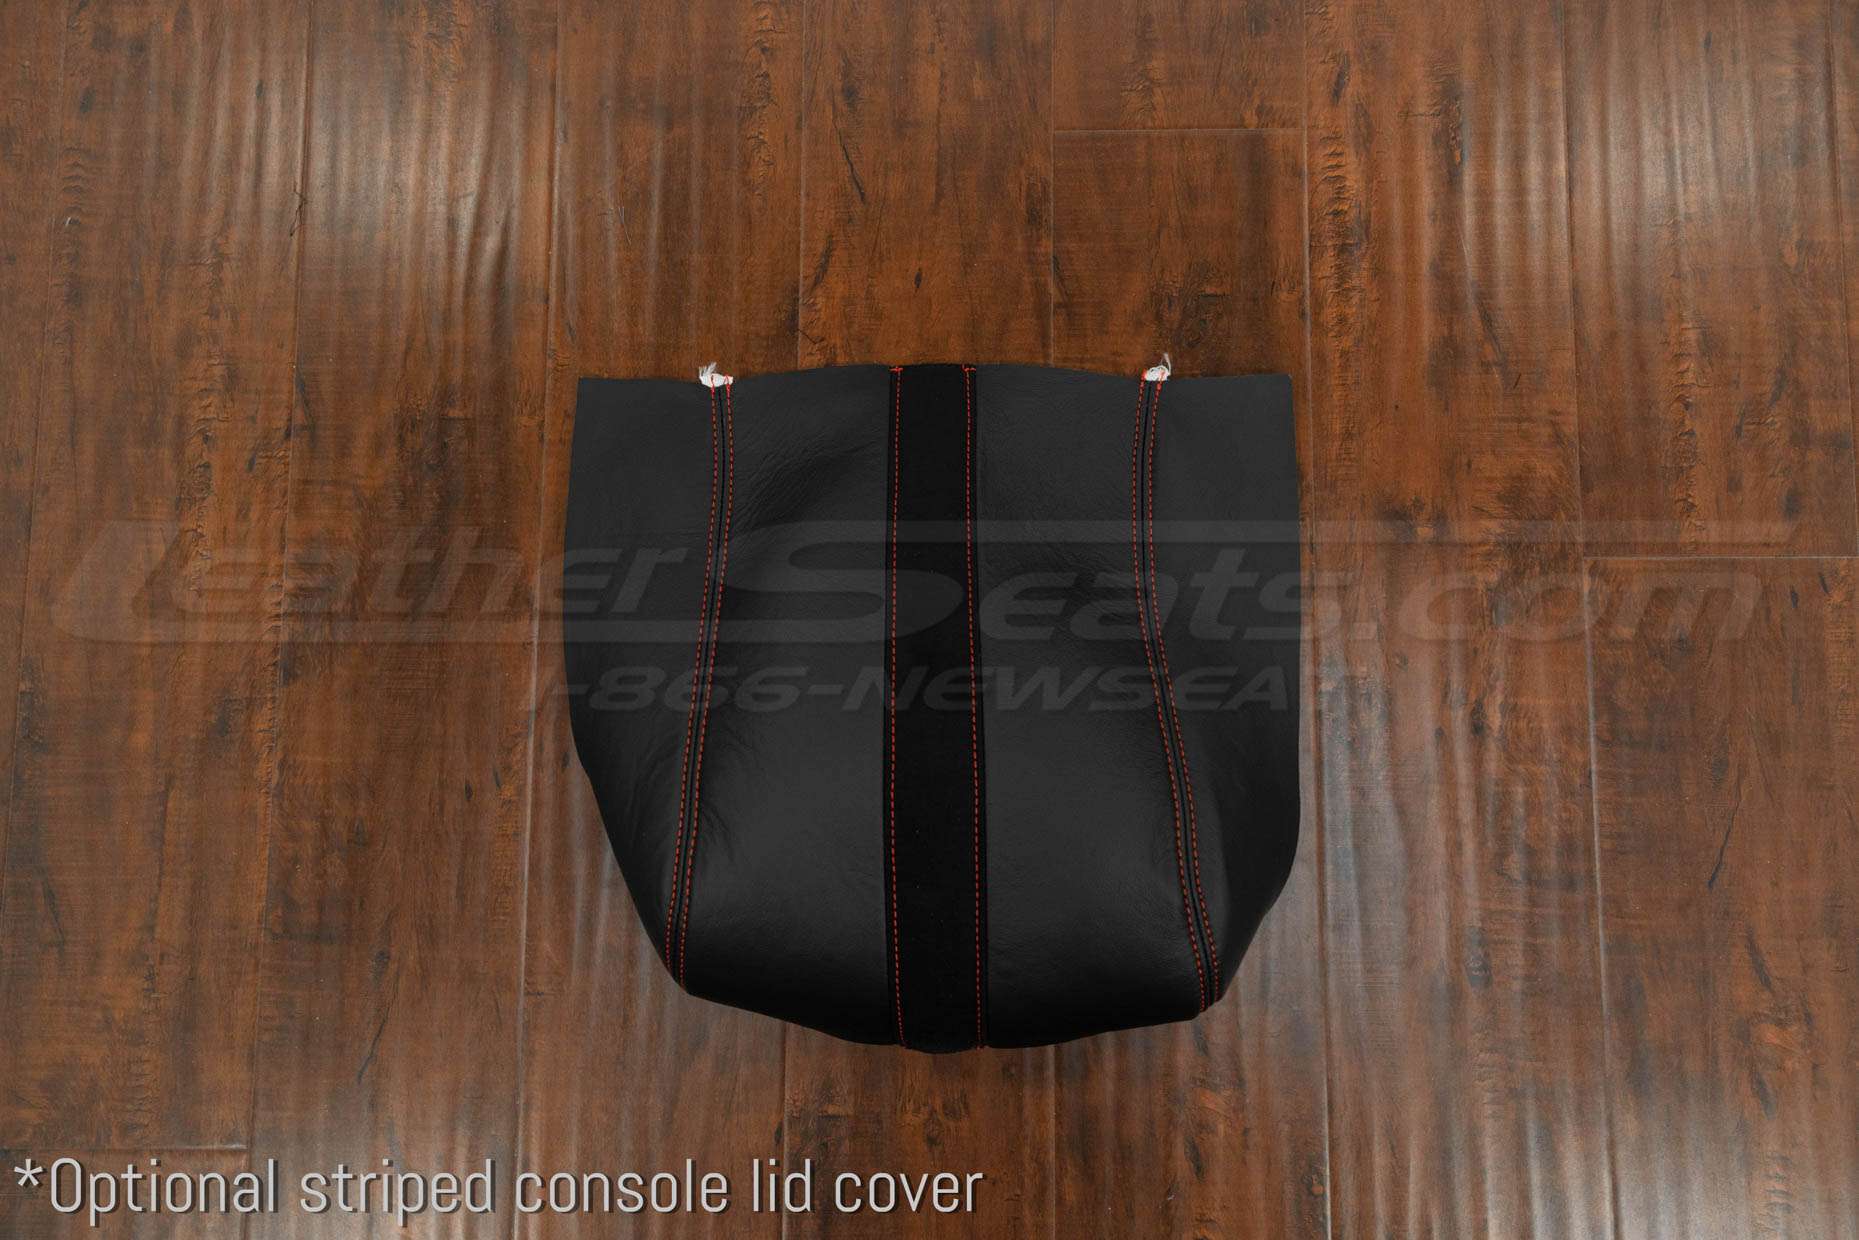 Optional striped console lid cover